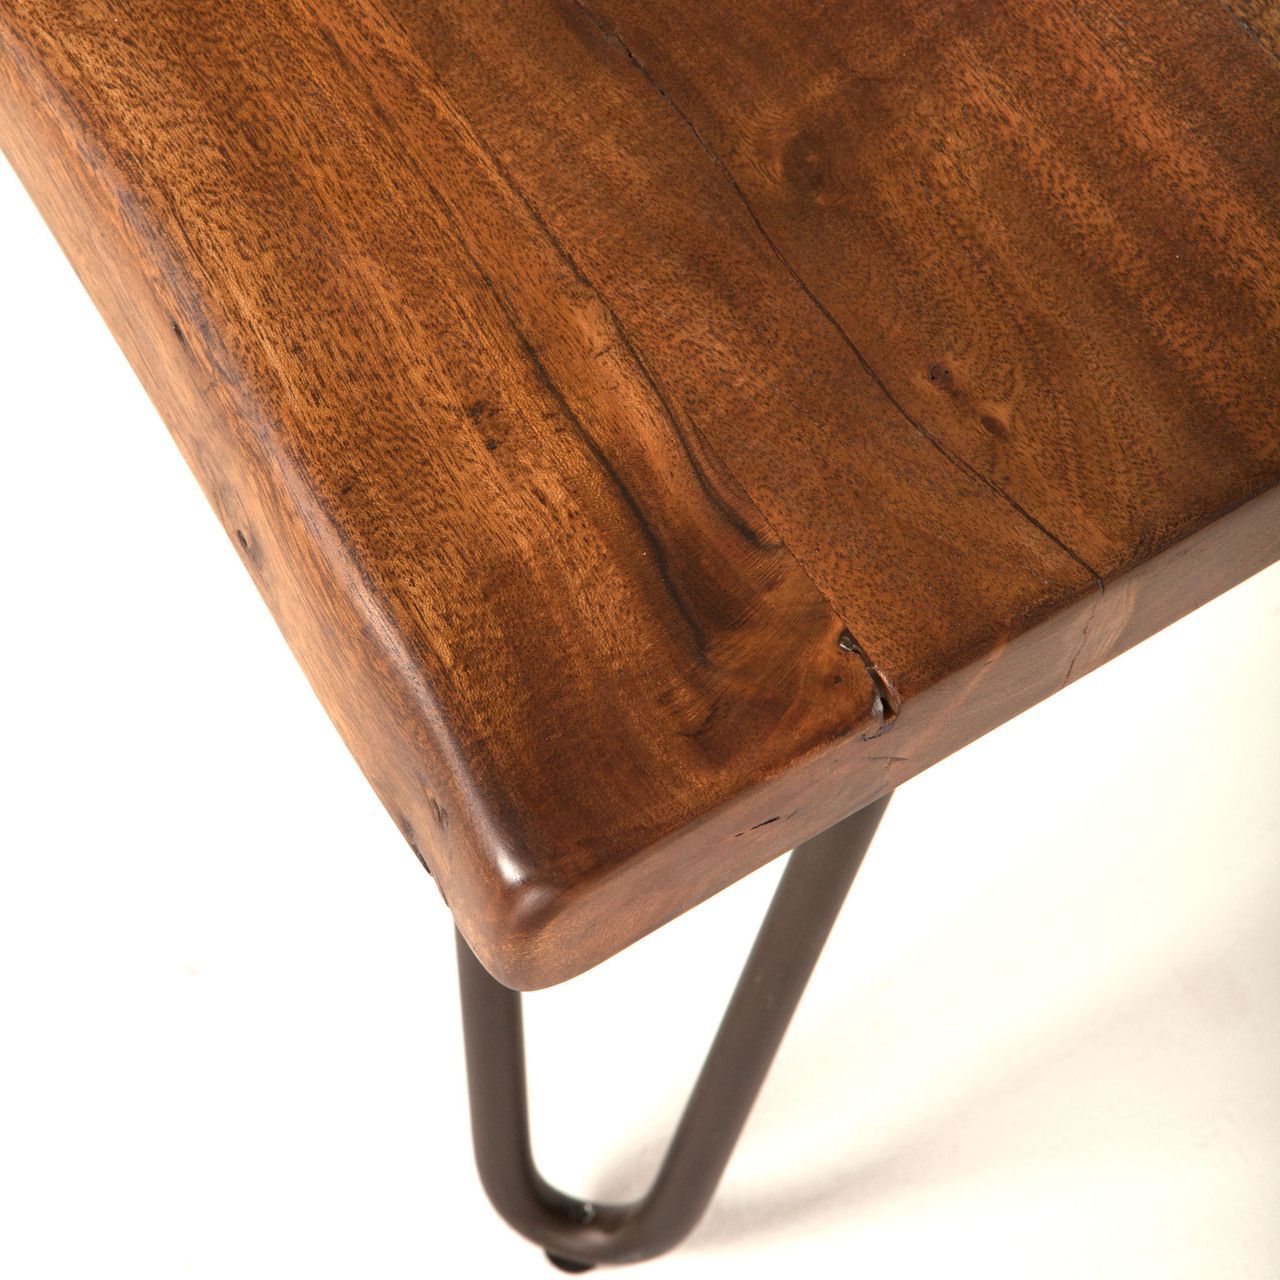 Vail Solid Wood Coffee Table In Walnut W/ Steel Legs | Solid Wood Throughout Coffee Tables With Solid Legs (View 15 of 15)